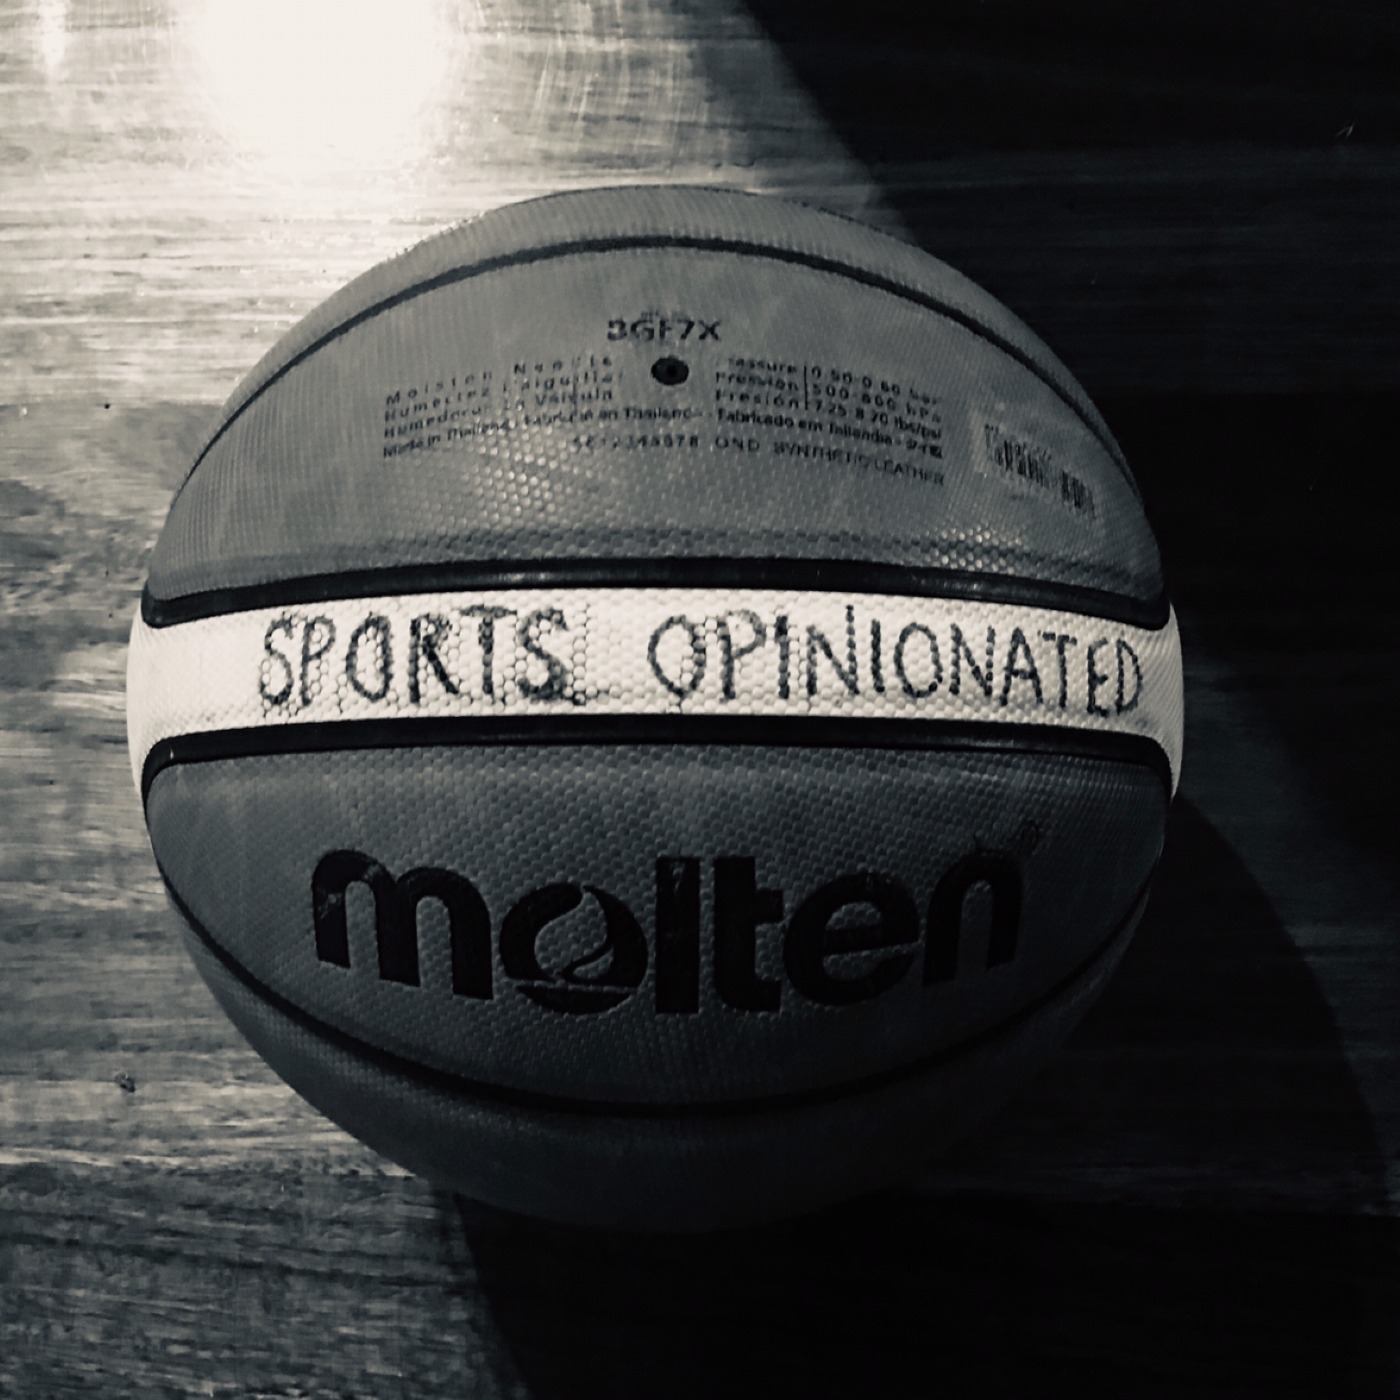  Sports Opinionated - Pod 7 - 2020 NBA Playoff Preview